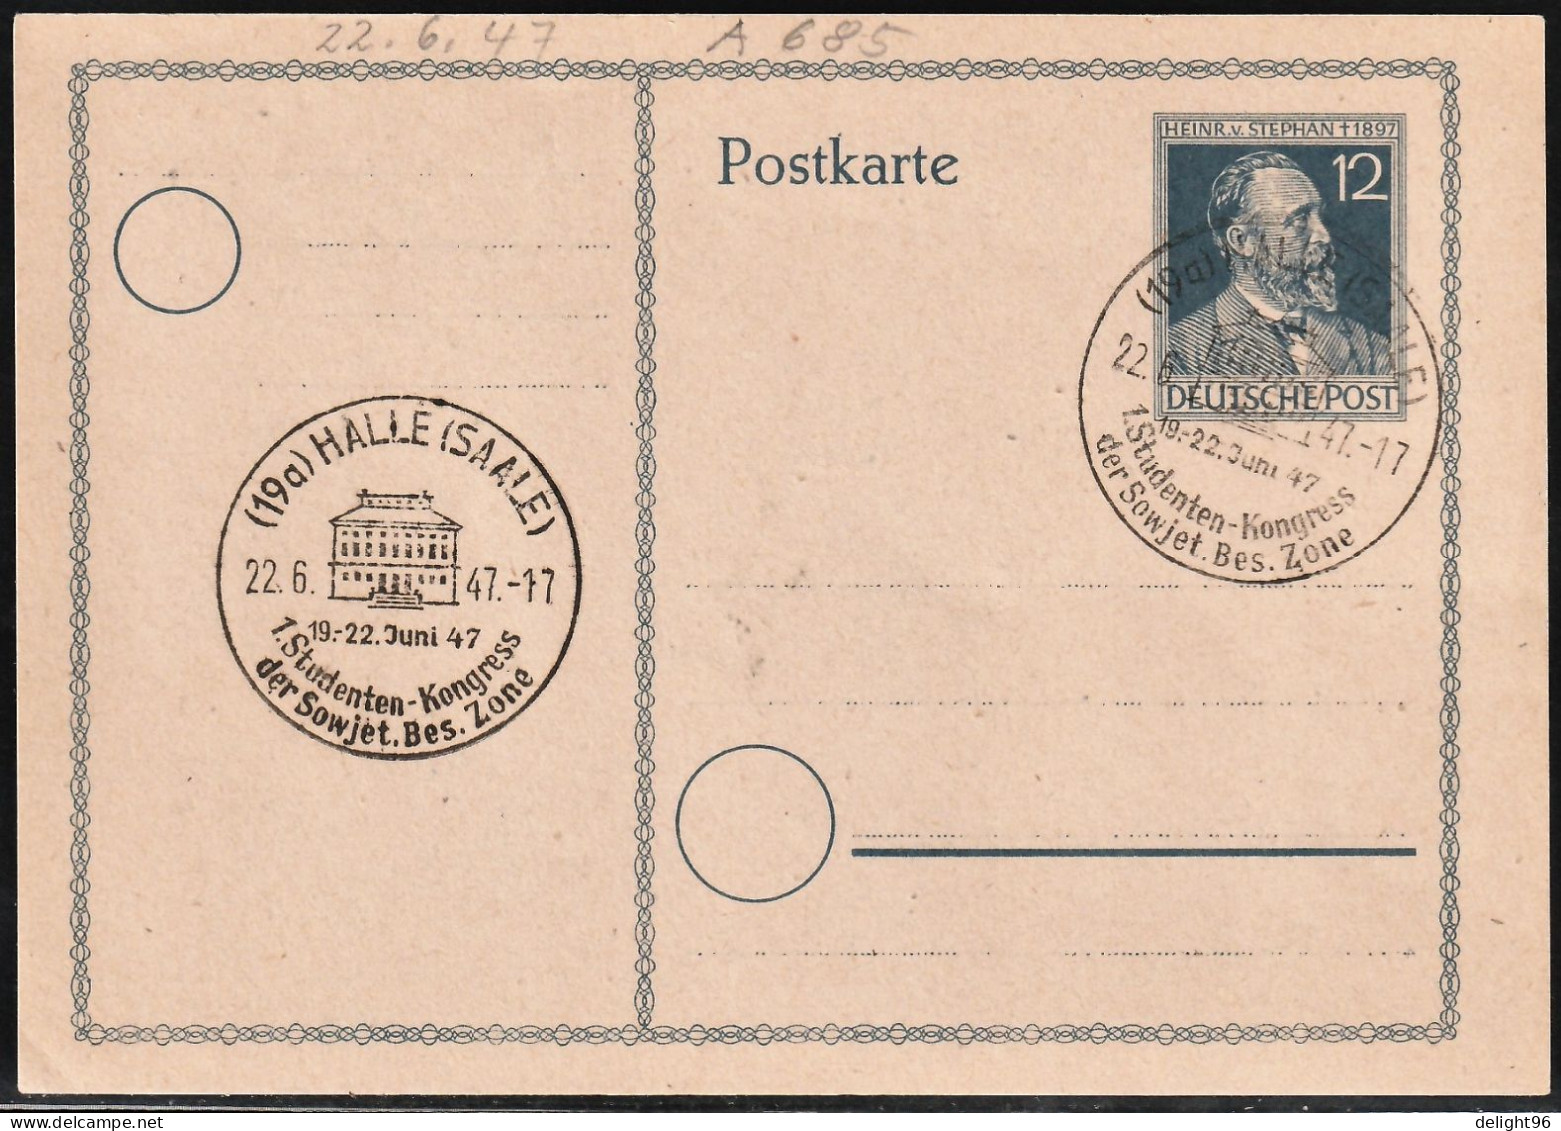 1947 Germany (Allied Joint Occupation Zone) Heinrich Stephan Postal Stationery With Commemorative Cancel - Postal  Stationery